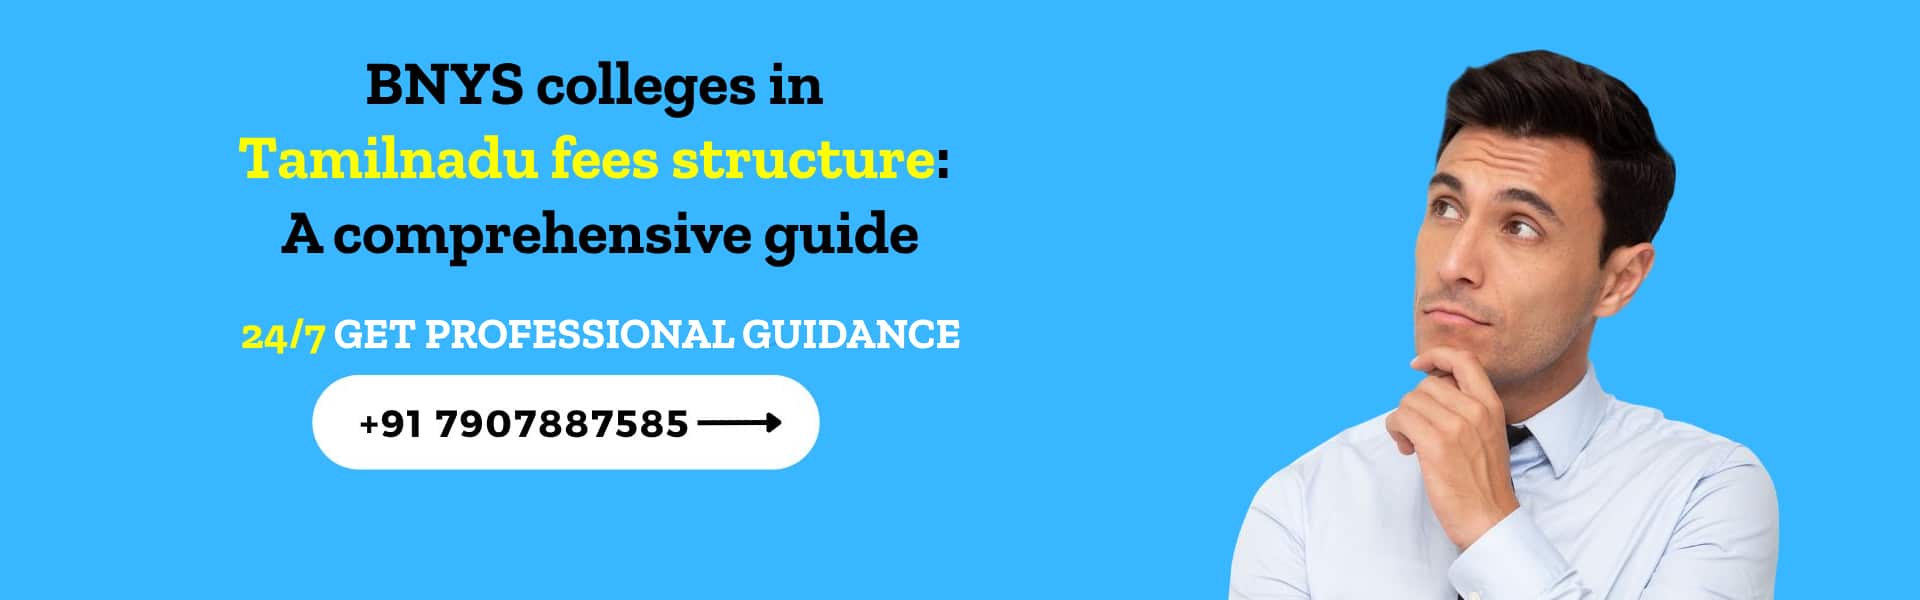 BNYS-colleges-in-Tamilnadu-fees-structure-A-comprehensive-guide